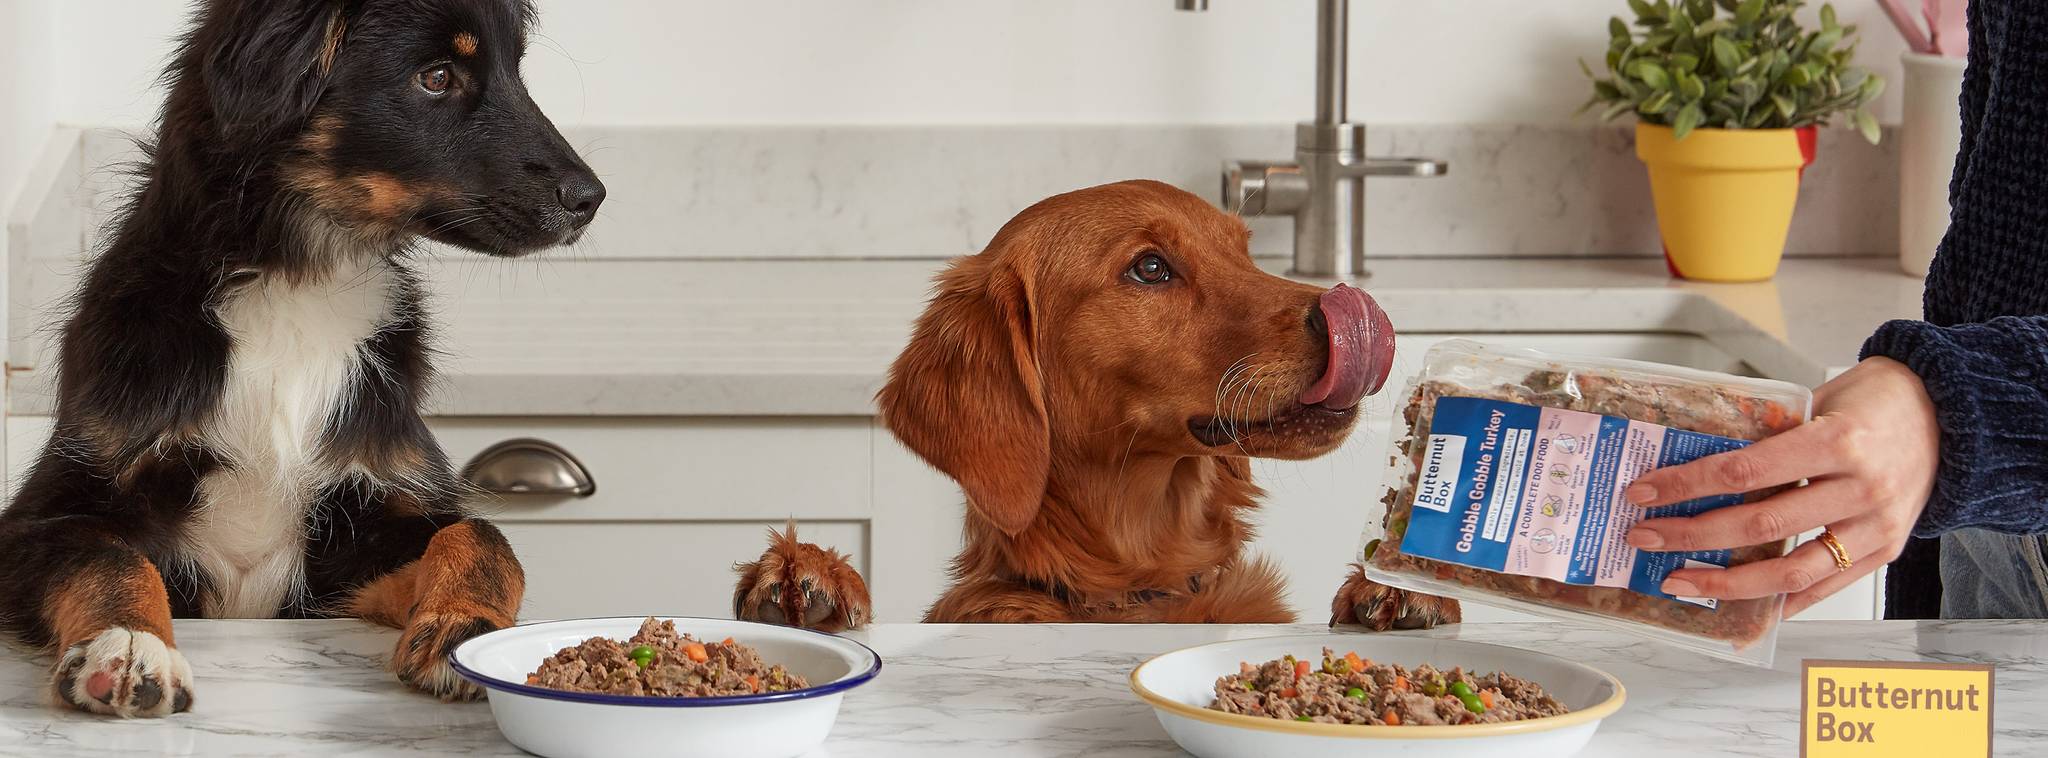 Butternut Box: pet food fit for people's palettes